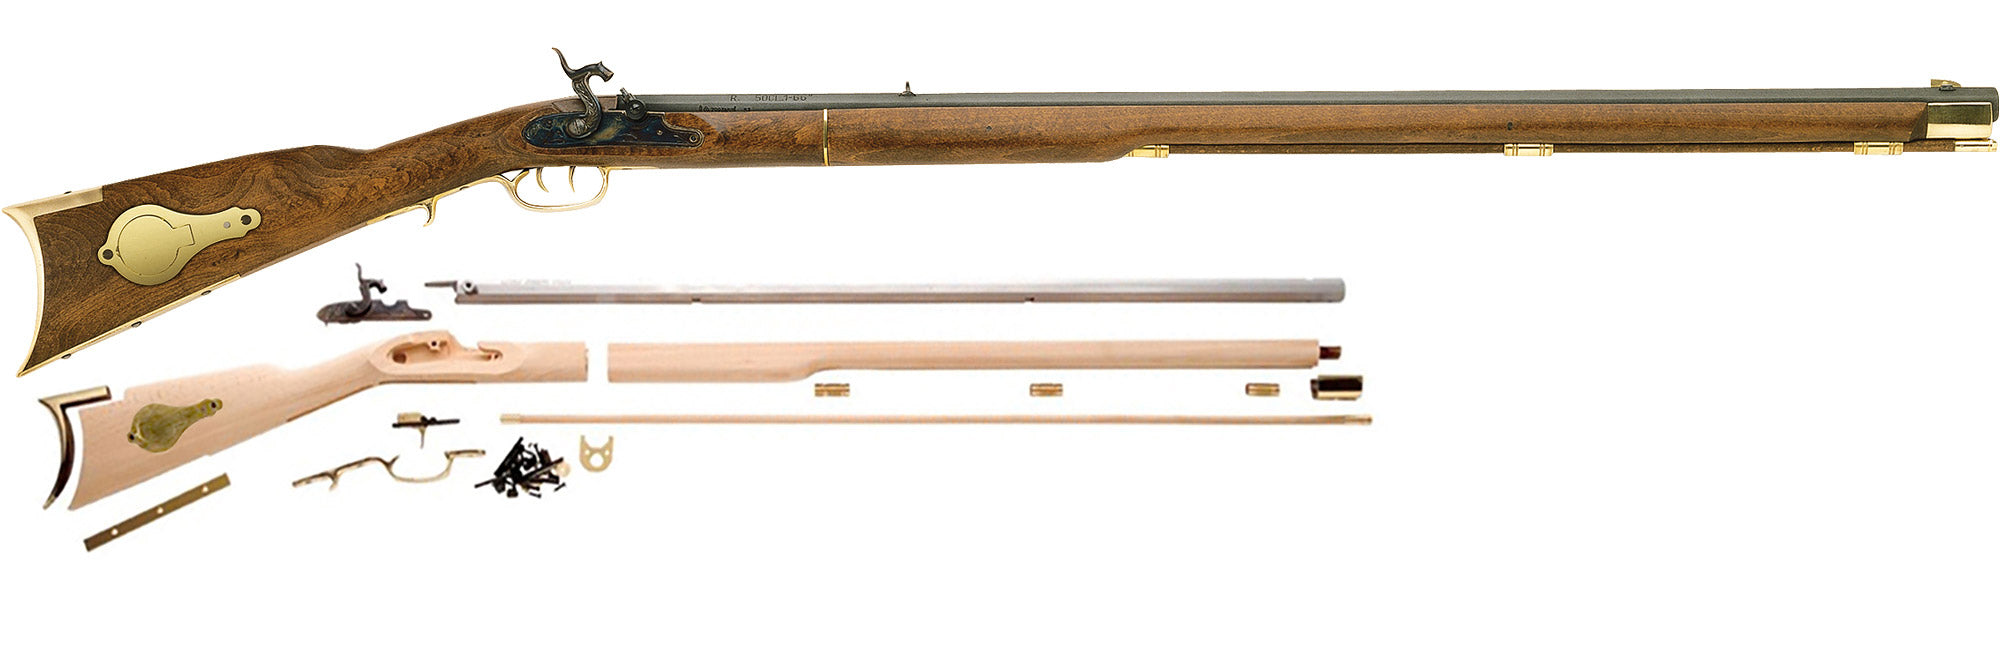 Traditions™ Deluxe Kentucky Rifle Kit - Percussion - KRC52306